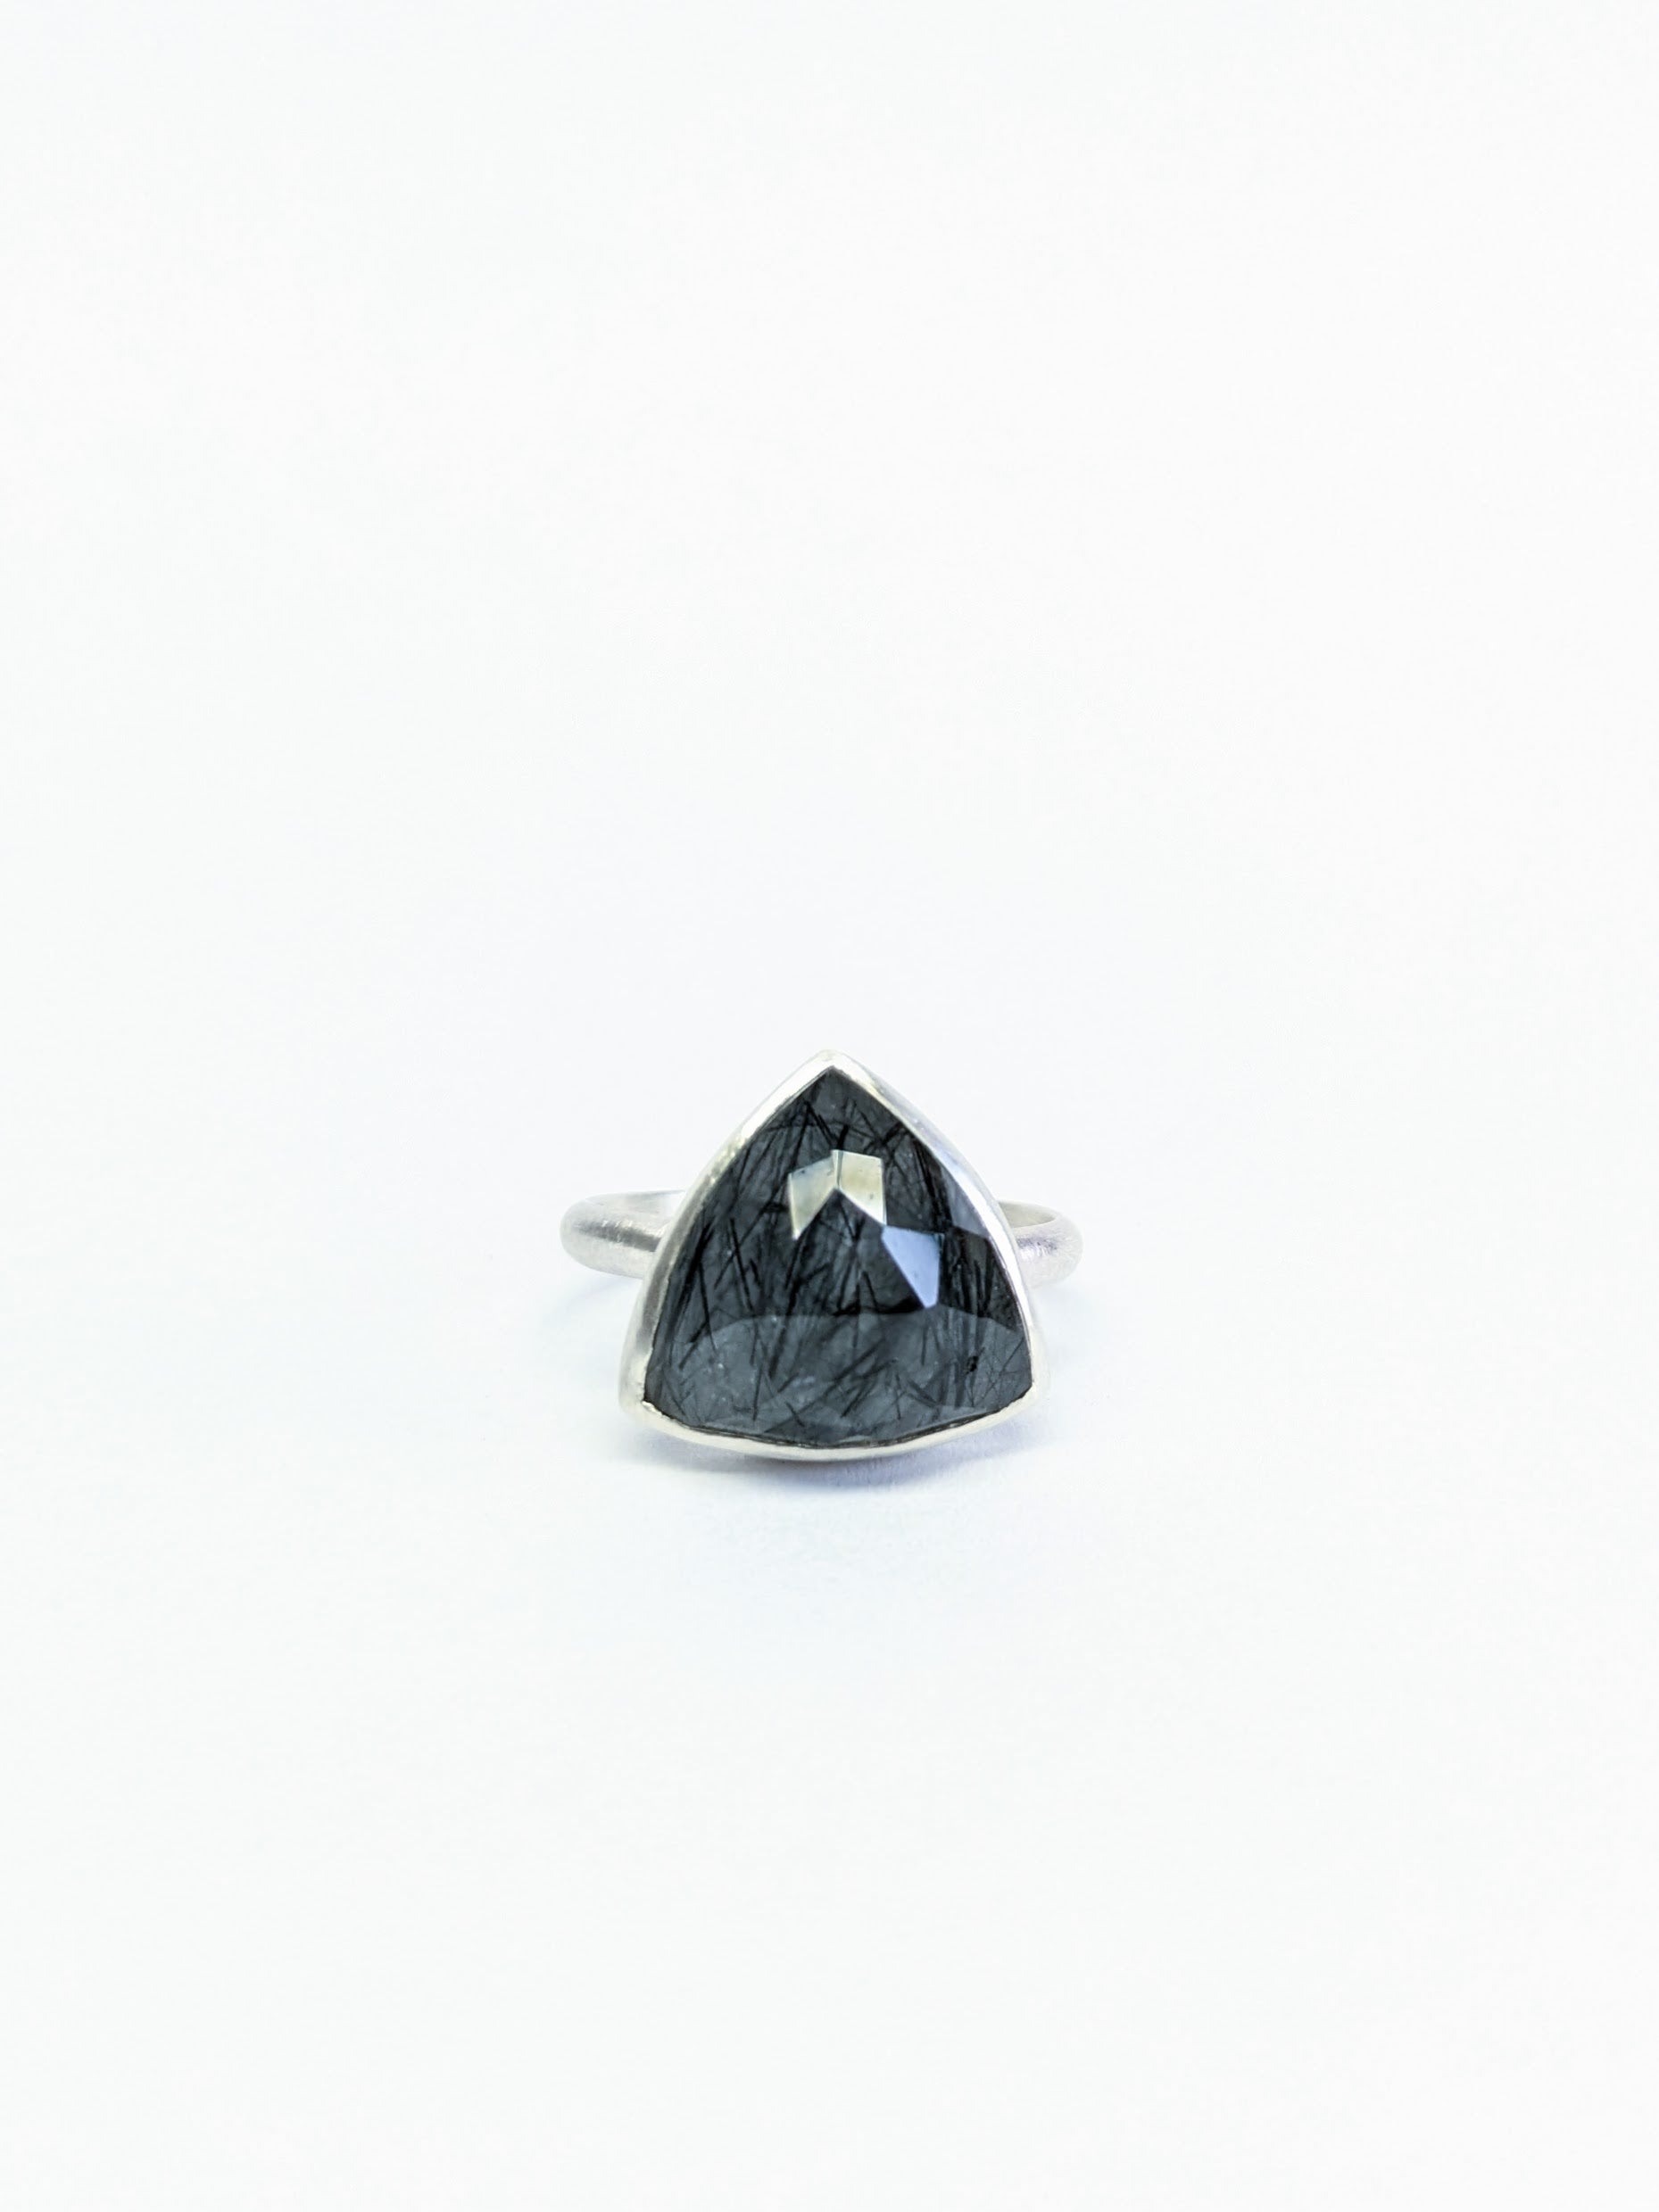 Faceted Tourmalinated Quartz Ring - Size 8.75